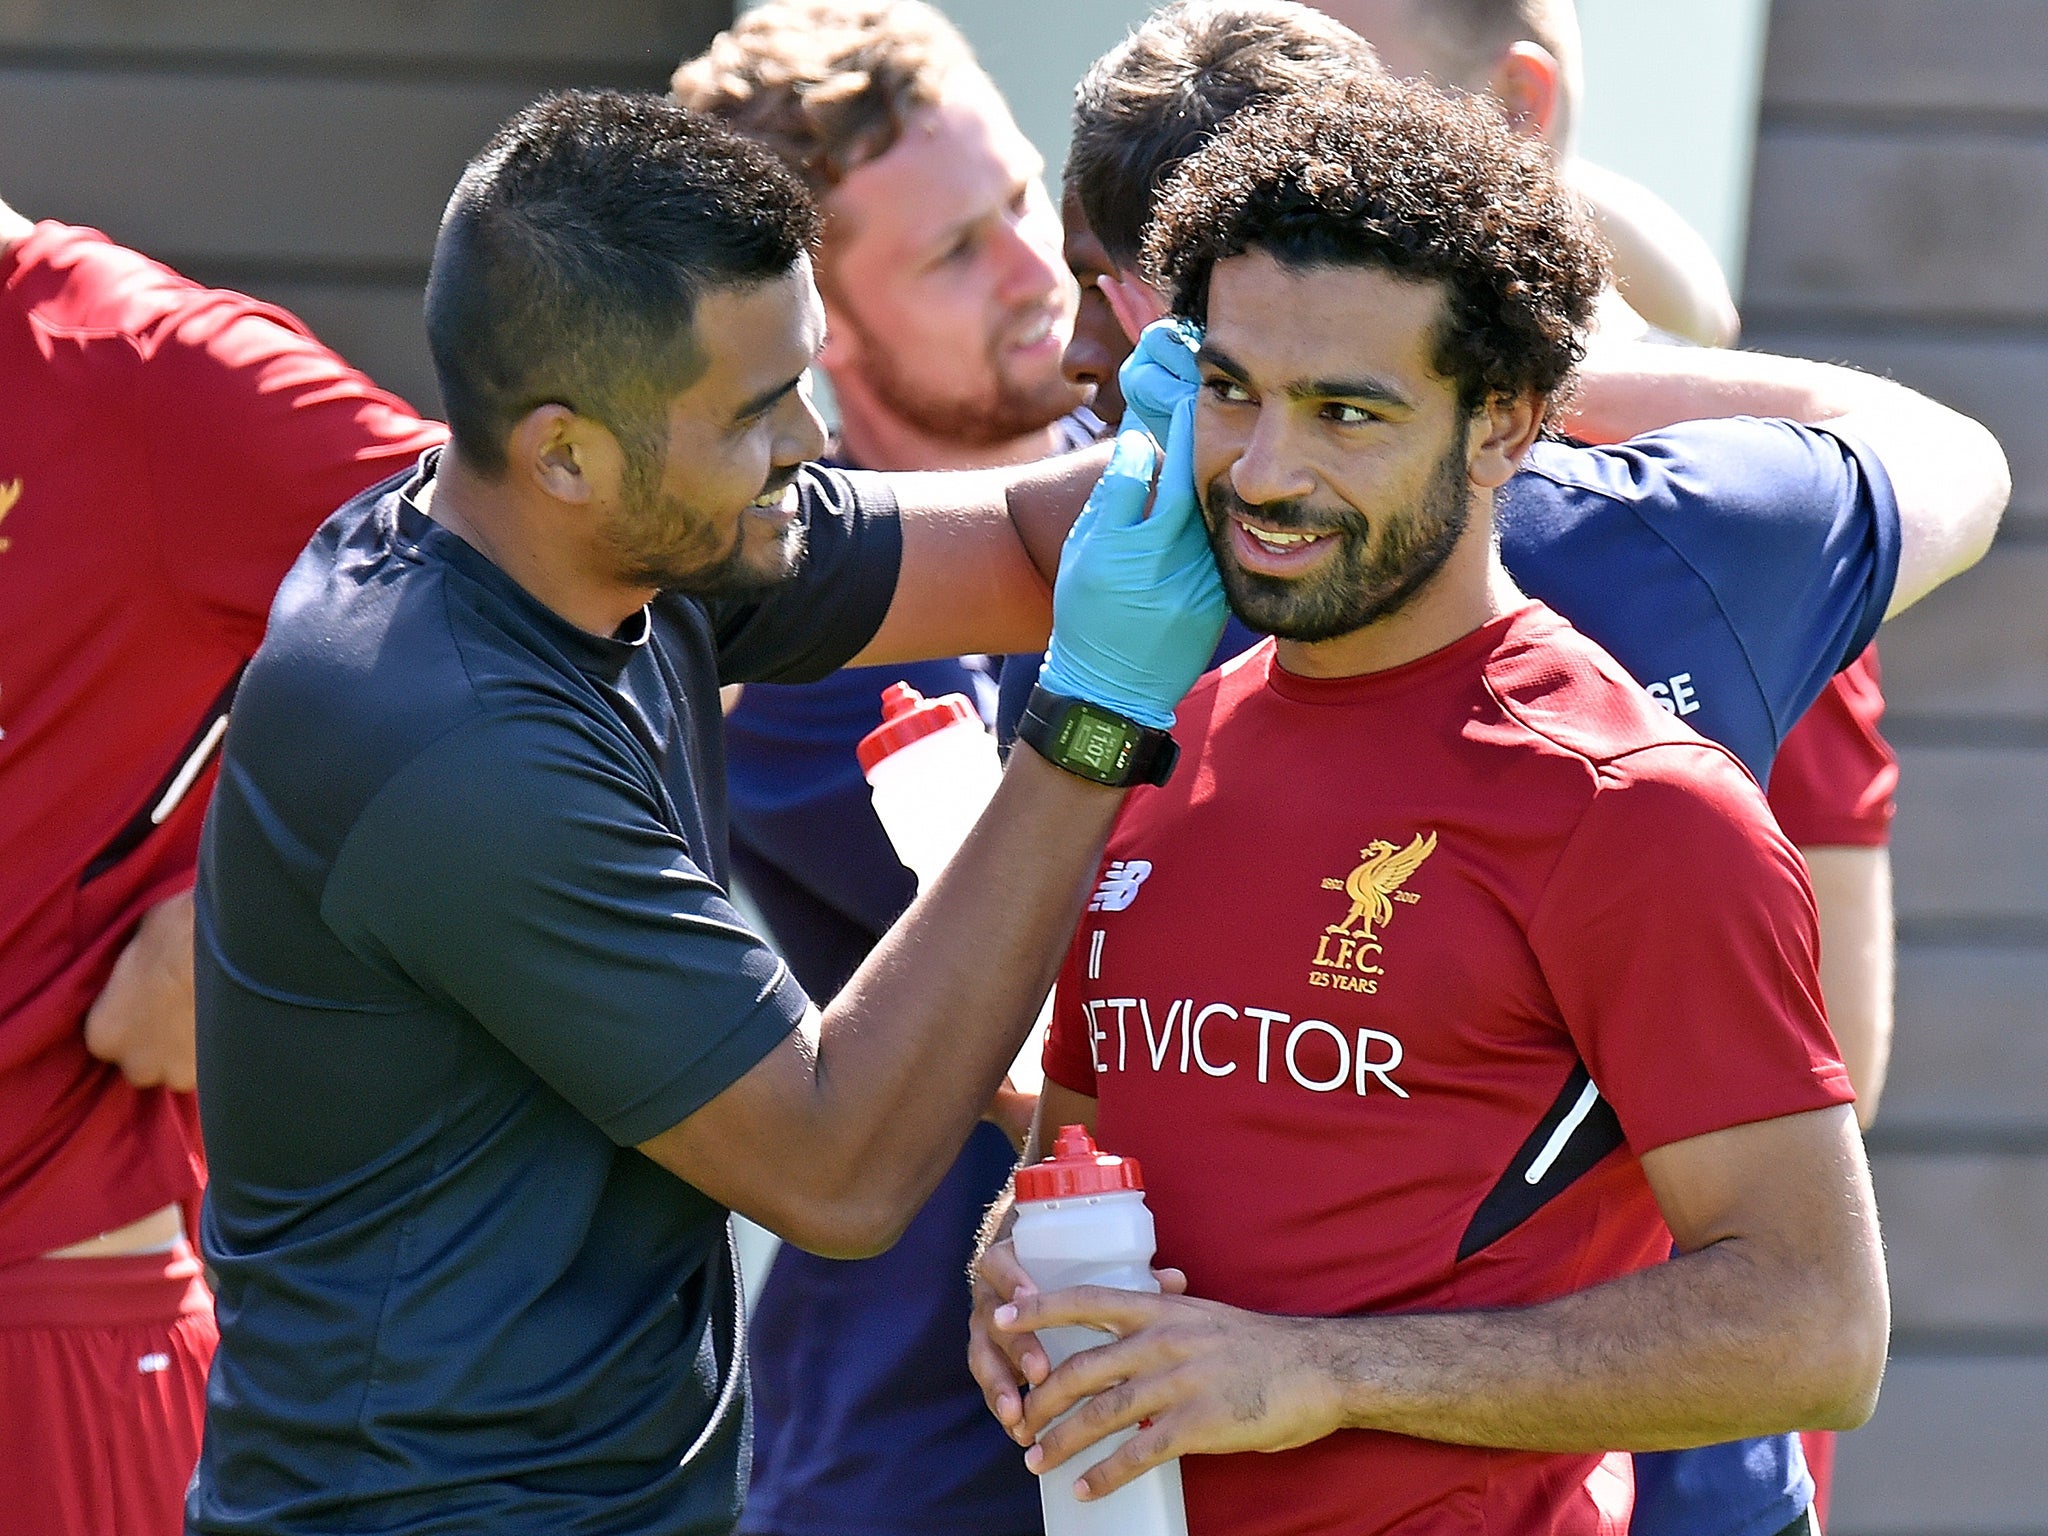 Mohamed Salah will have to wait before making his non-competitive debut for Liverpool